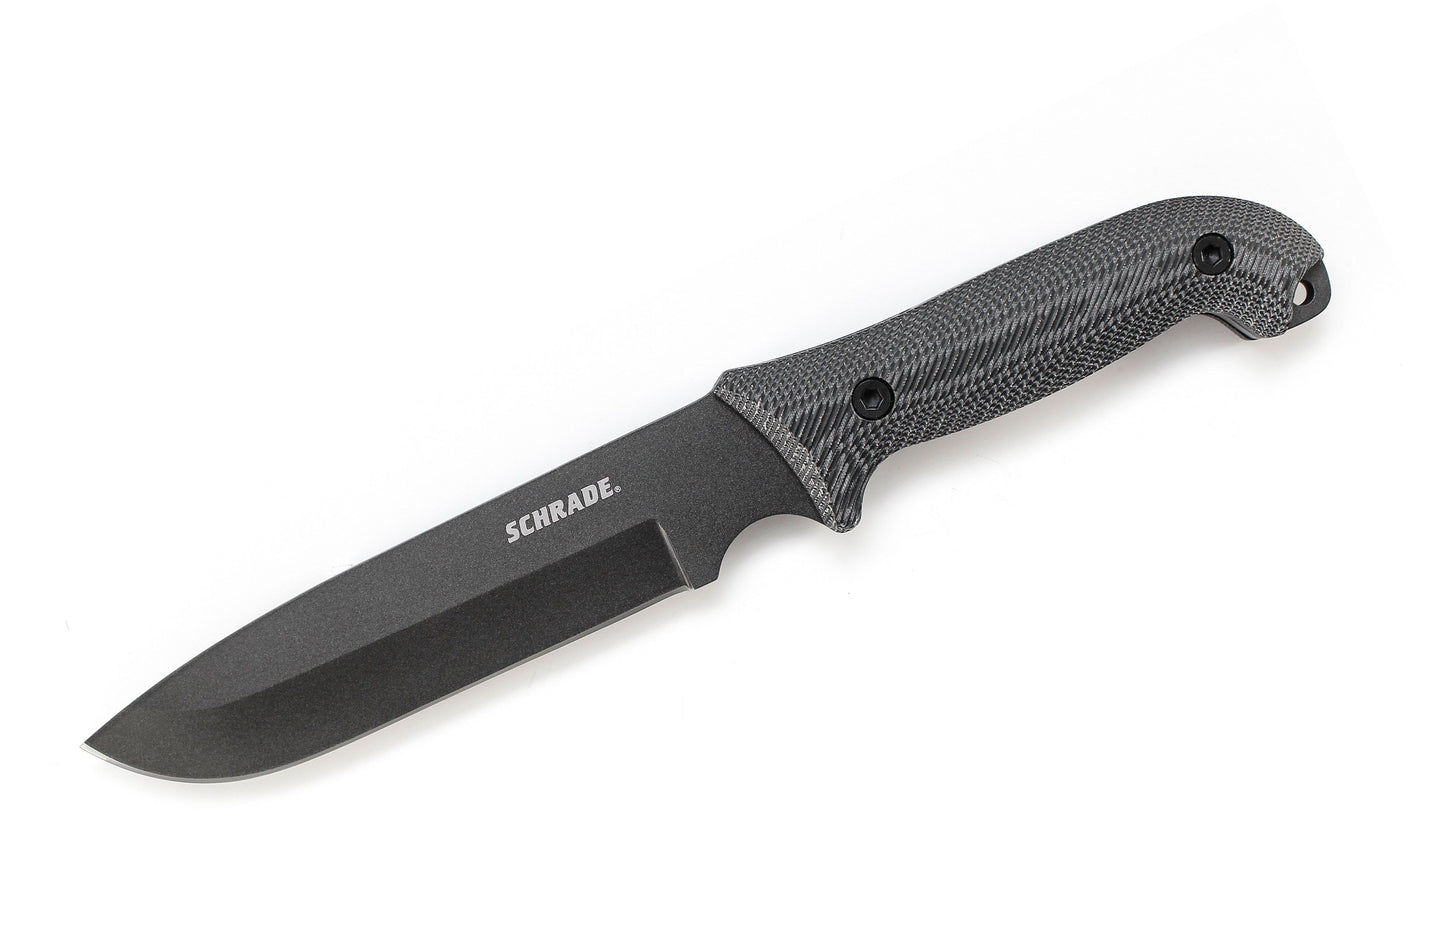 Schrade Frontier Fixed Blade Knife + Sheath and Accessories #SCHF52M